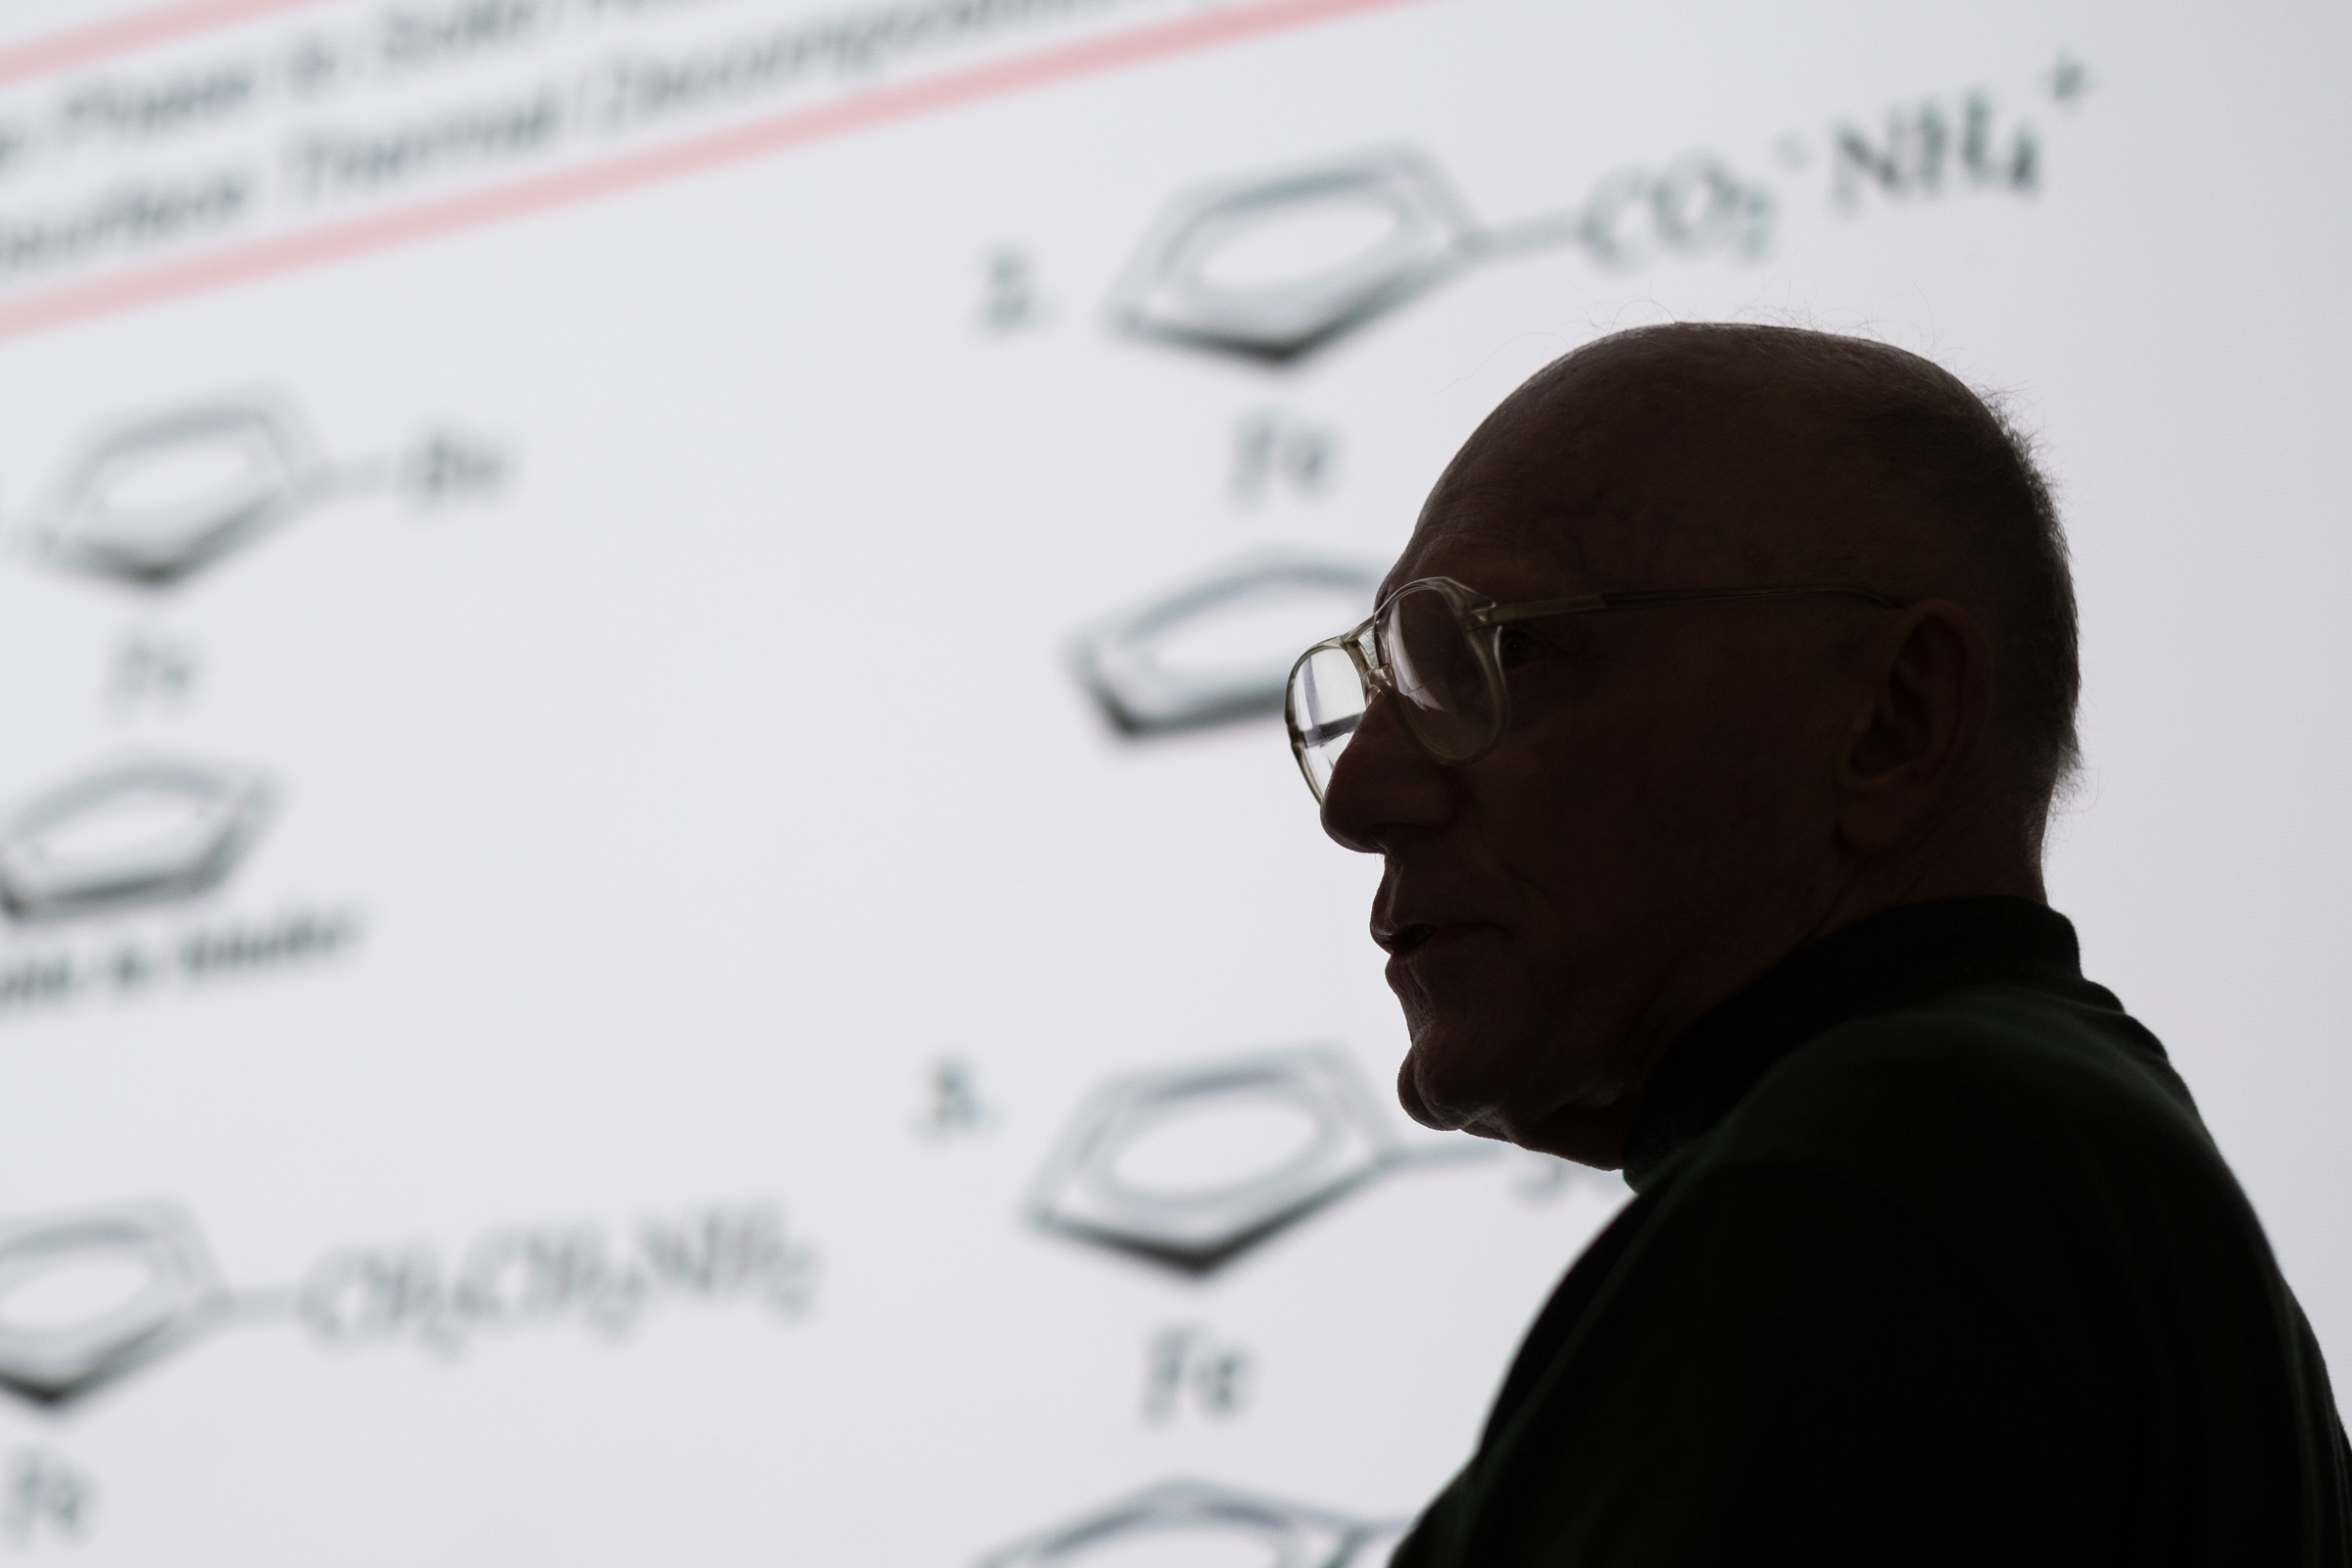 Emeritus Professor Pittman&#039;s profile in silhouette with chemistry diagrams projected behind him.